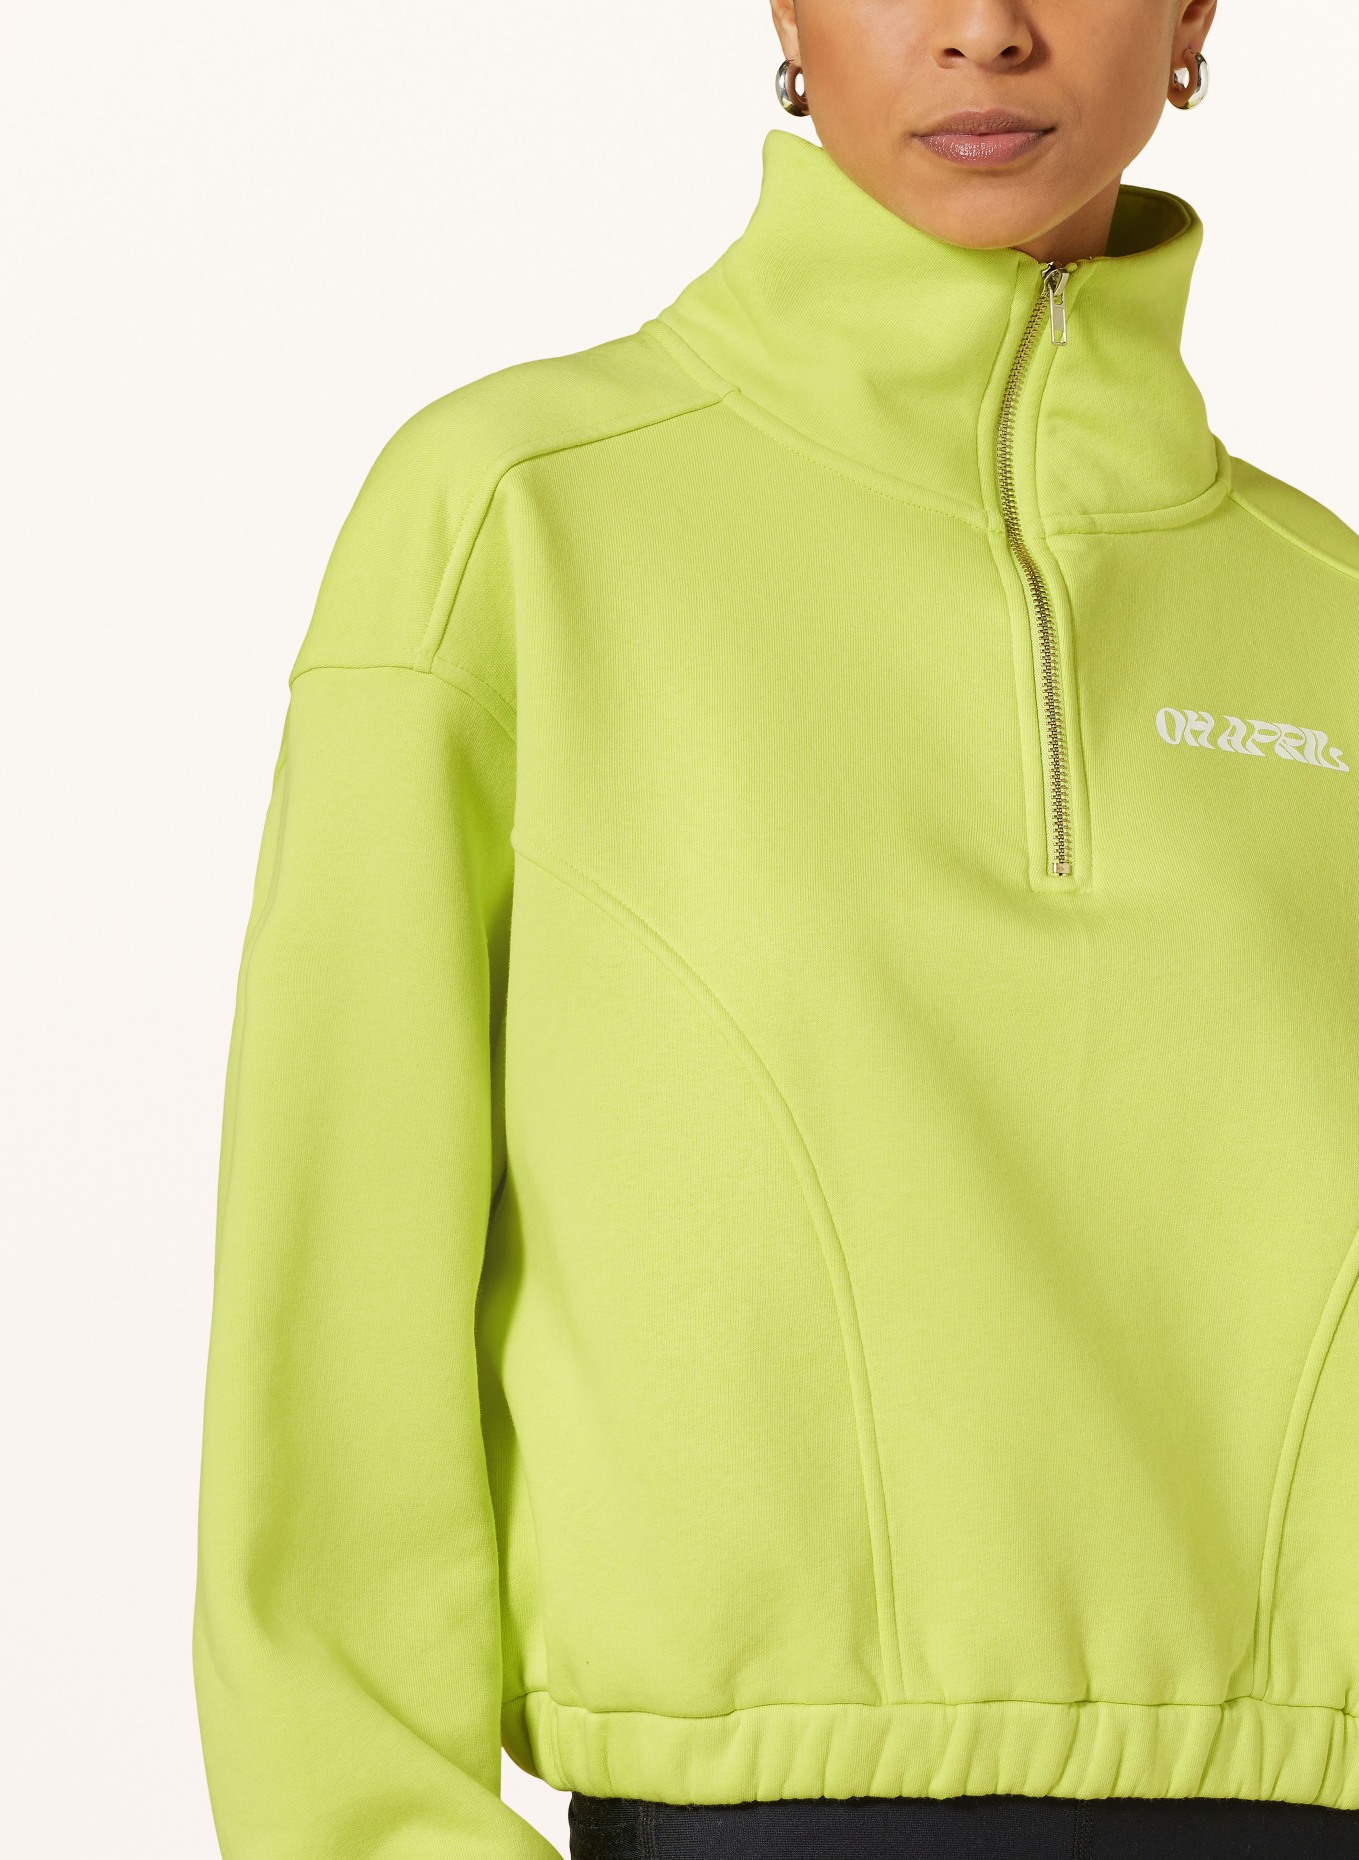 OH APRIL Sweatshirt fabric half-zip sweater EVIE, Color: LIME LIME (Image 4)